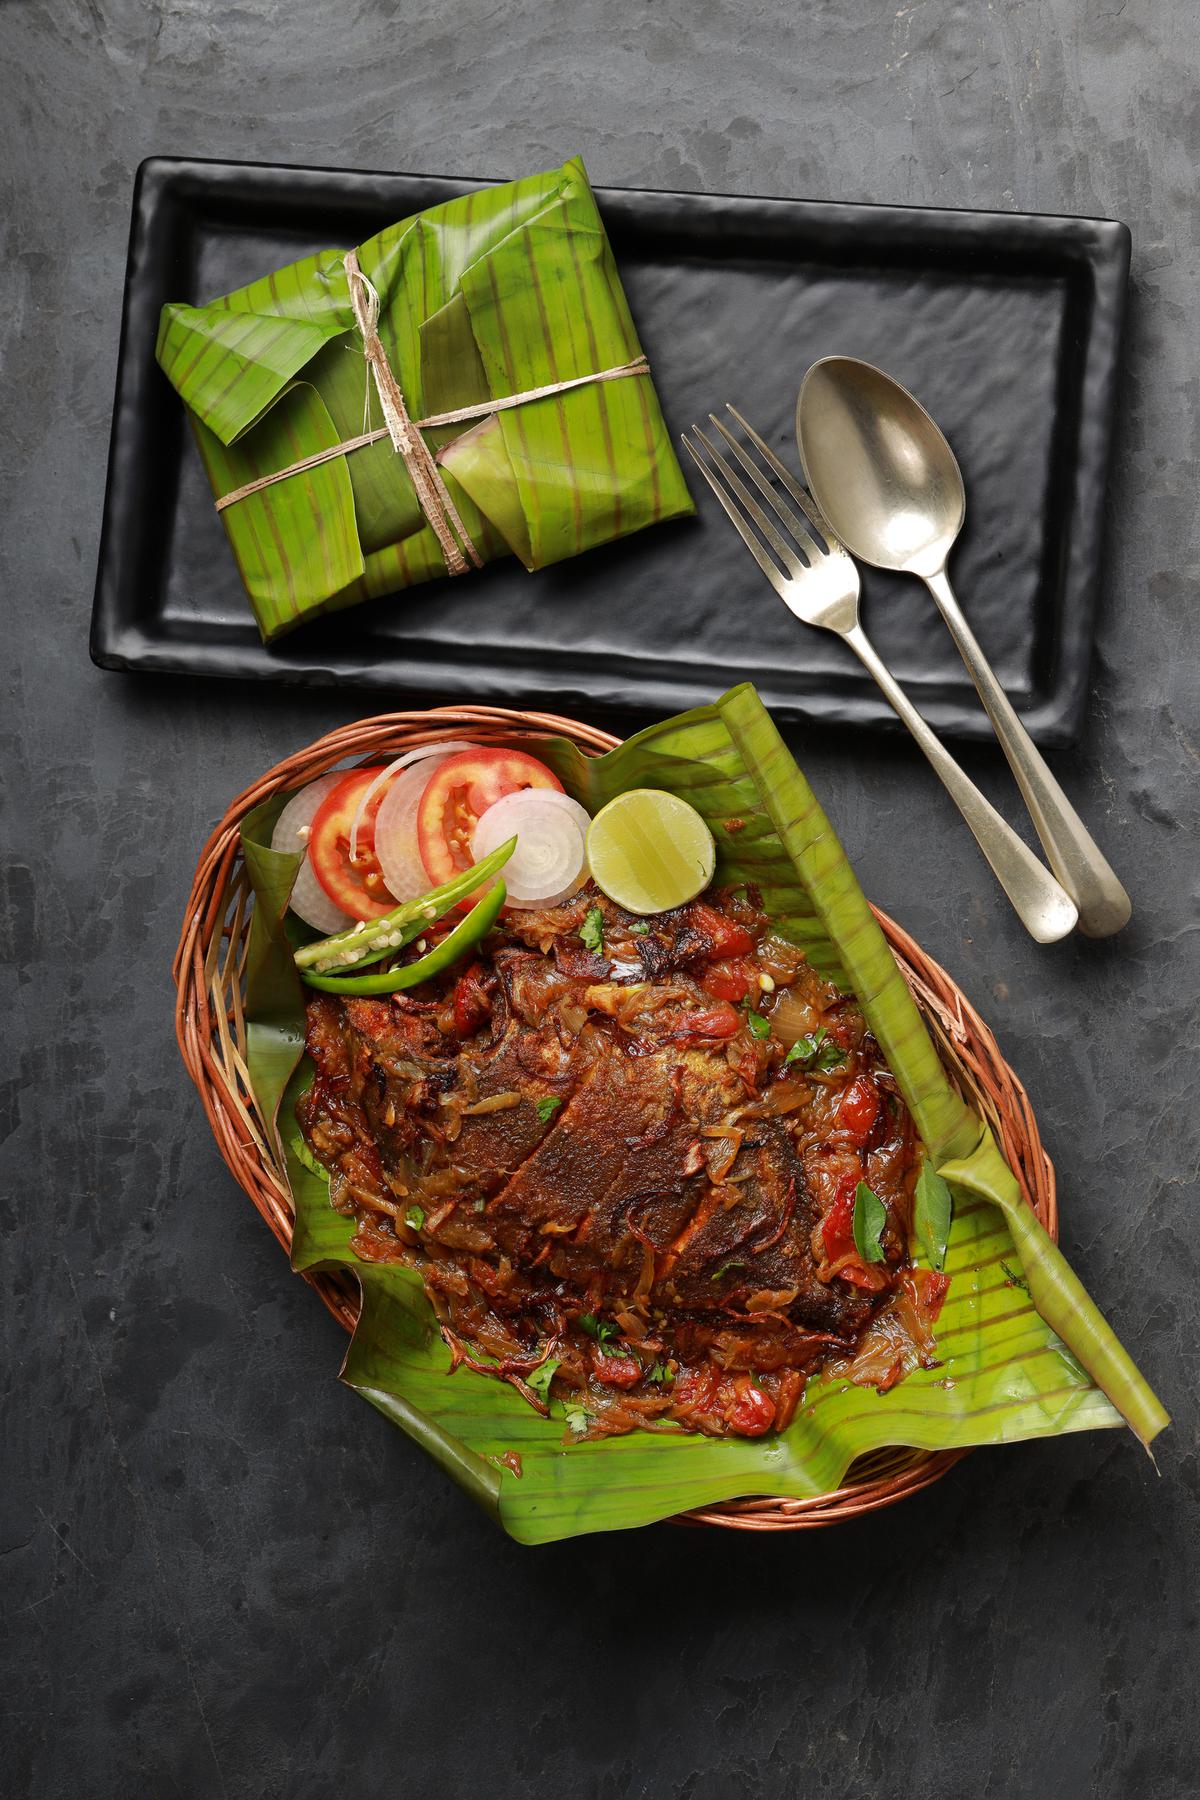 Meen Pollichathu or fish pollichathu is a dish wherein the fish is cooked with masala and wrapped in a banana leaf